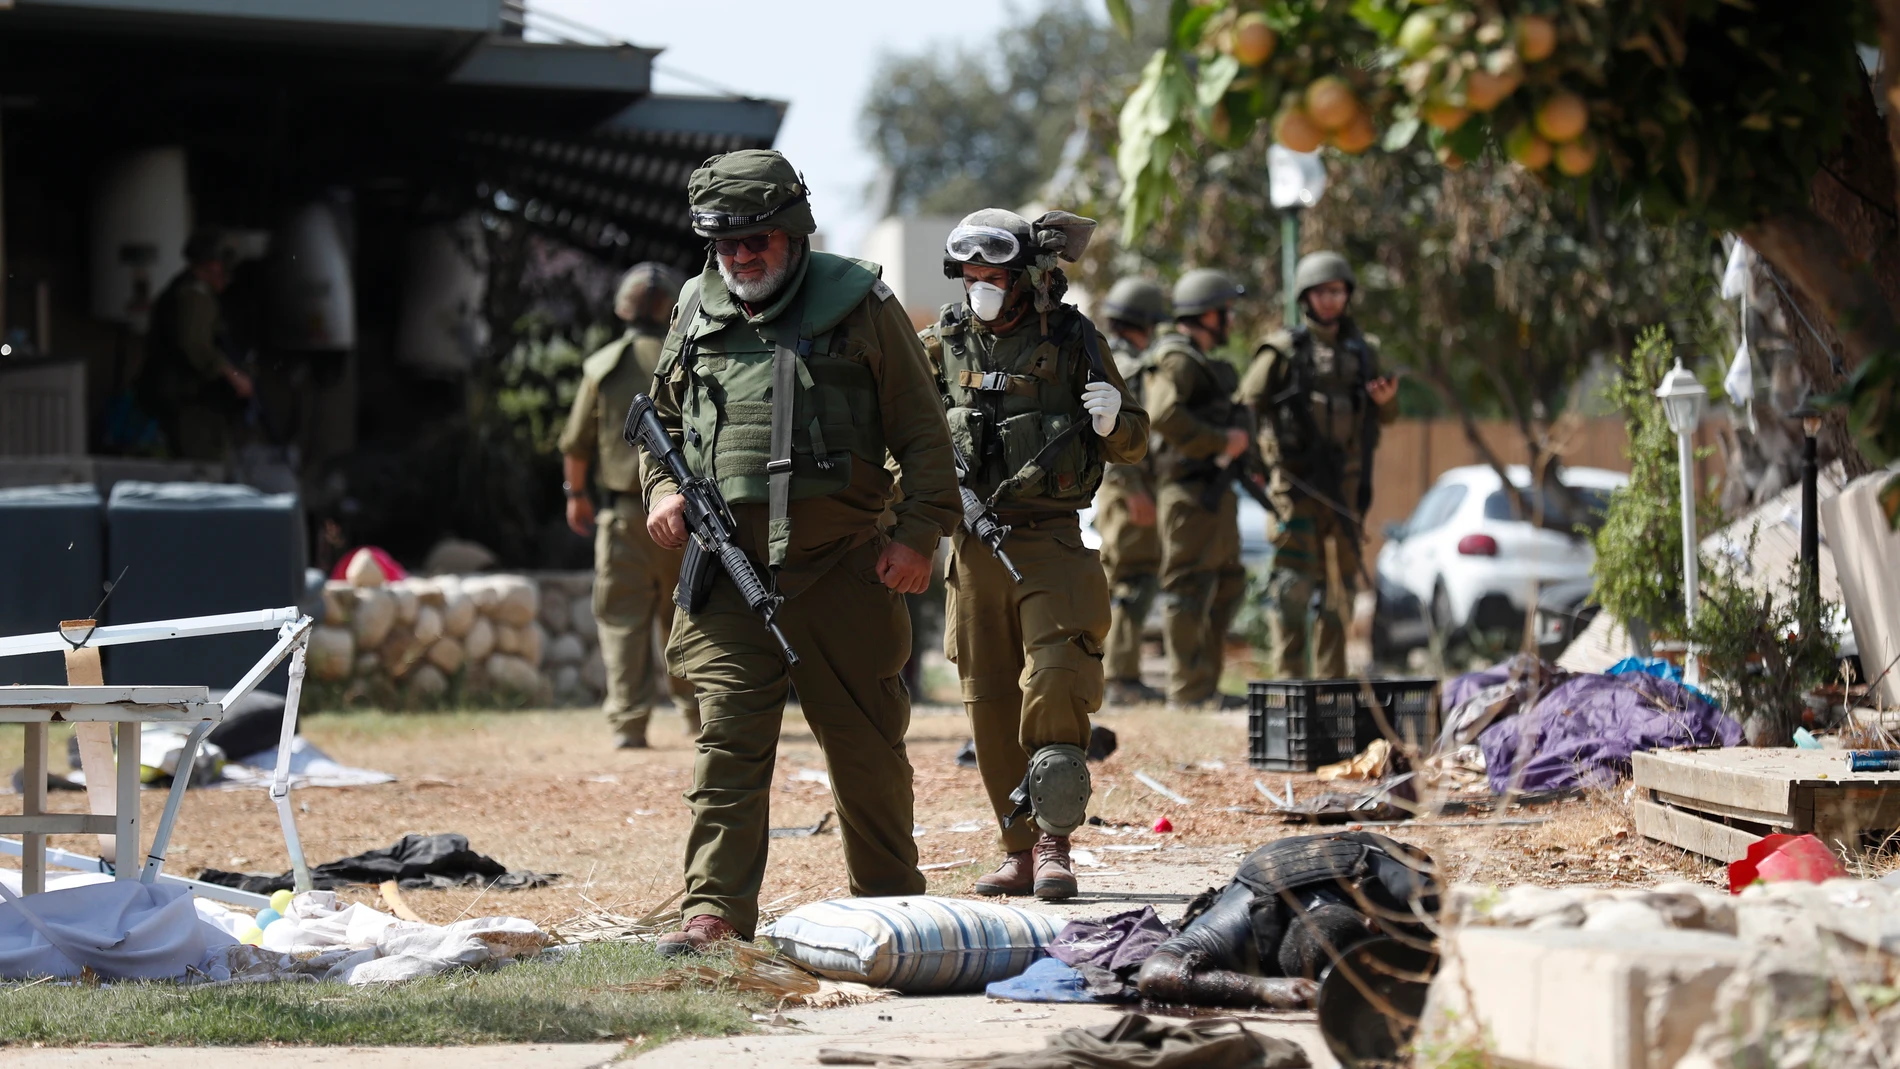 Kfar Aza (Israel), 10/10/2023.- Israeli soldiers walk next to the body of Hamas militant killed in Kfar Aza kibbutz next to the border with Gaza, 10 October 2023. More than 900 people have been killed, around 150 were taken as hostages, and 1,500 others injured, according to Israel Defence Forces (IDF), after the Islamist movement Hamas launched an attack against Israel on 07 October. More than 3,000 people, including 1,500 militants from Hamas, have been killed and thousands injured in Gaza ...